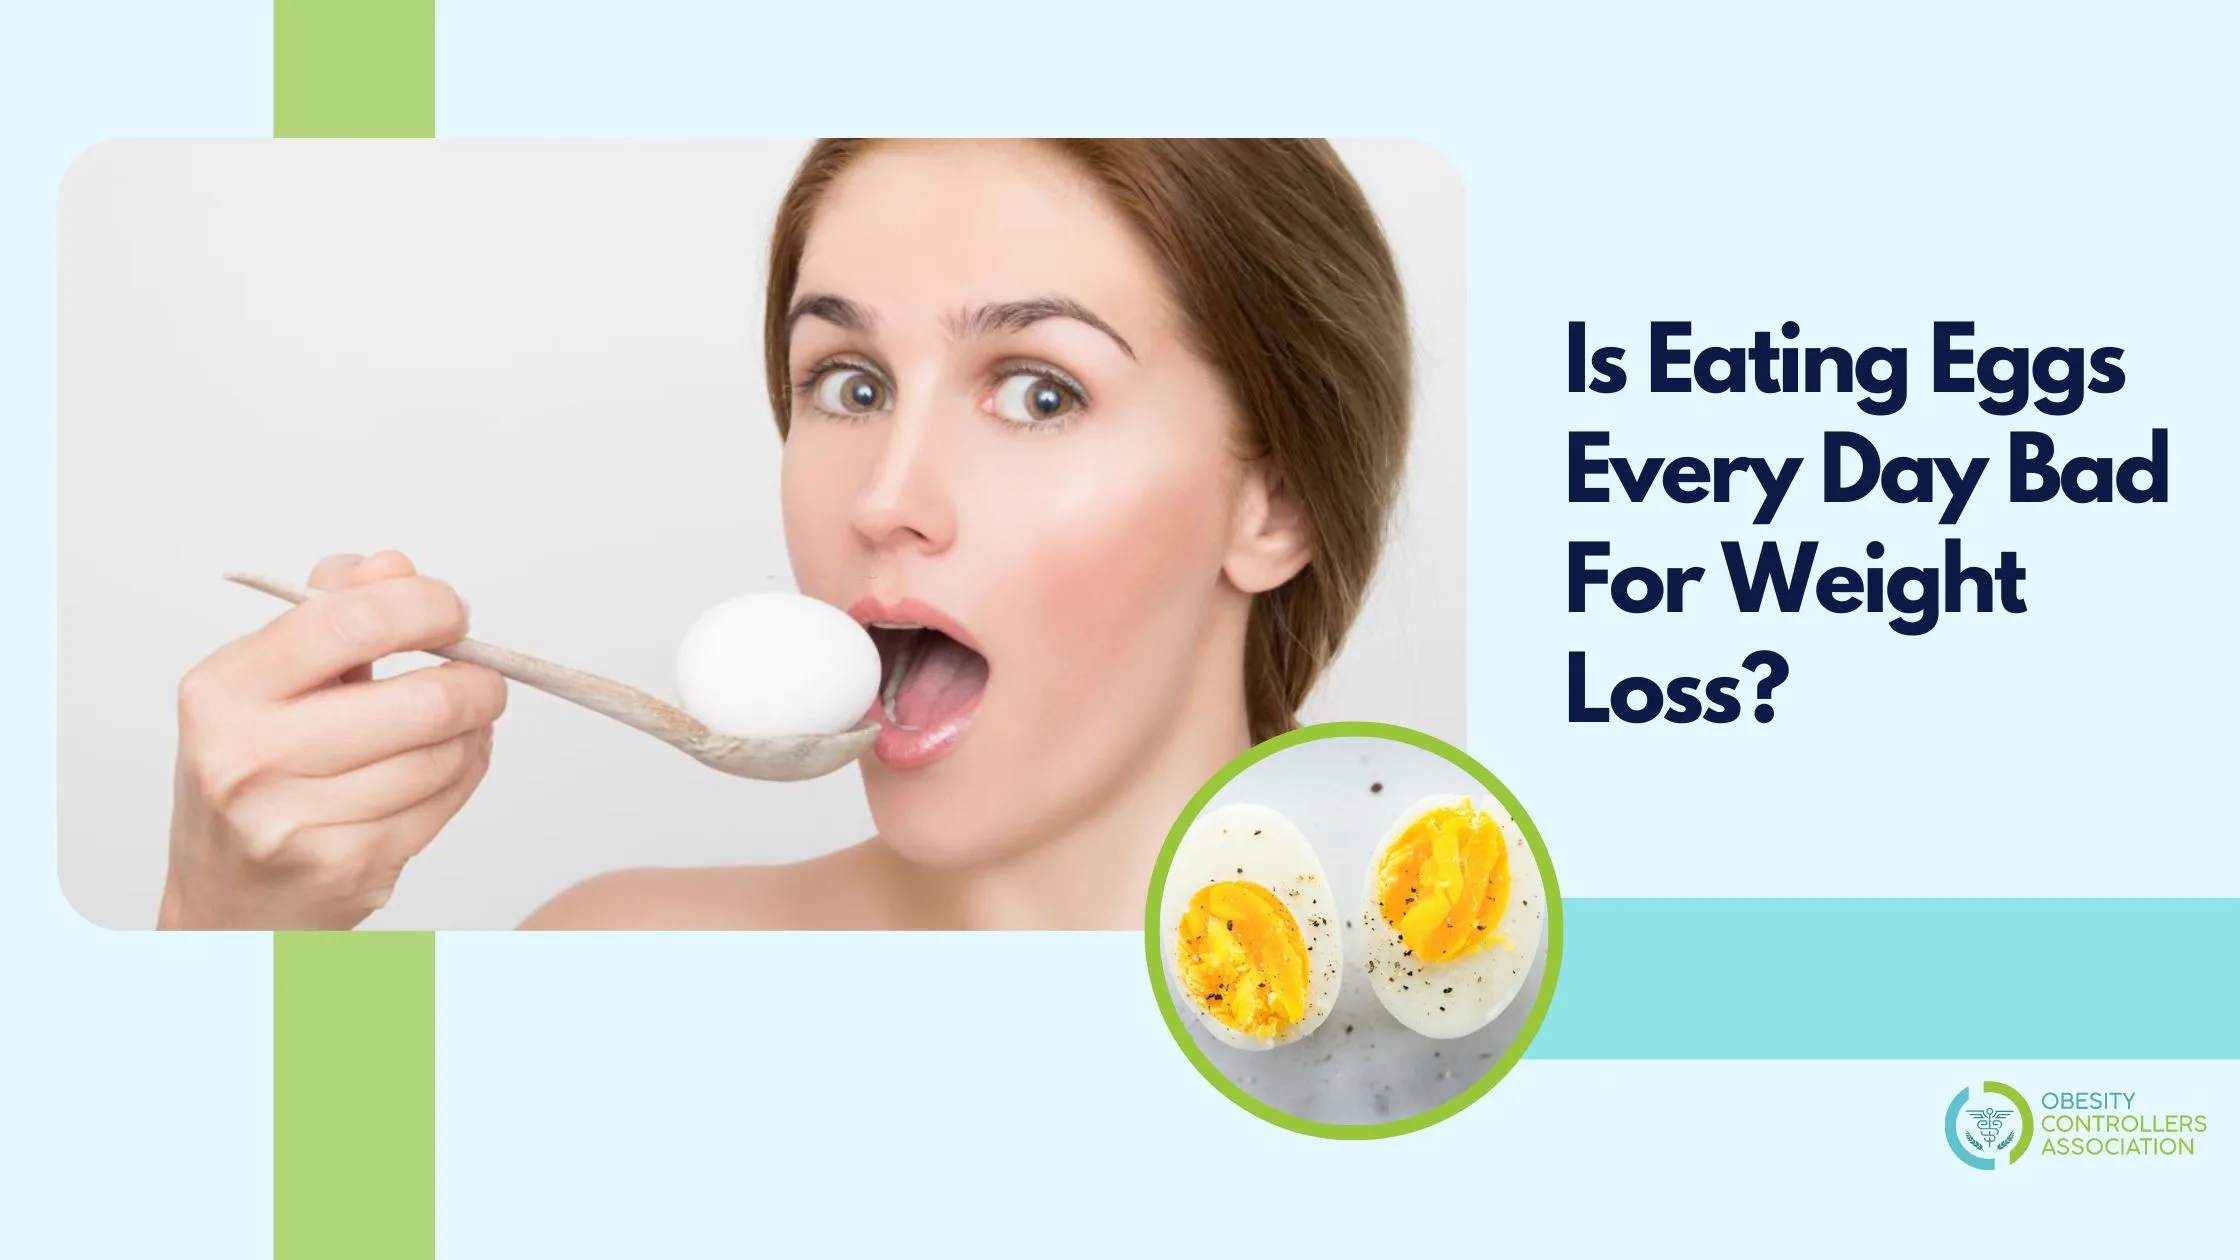 Eating eggs every day and weight loss